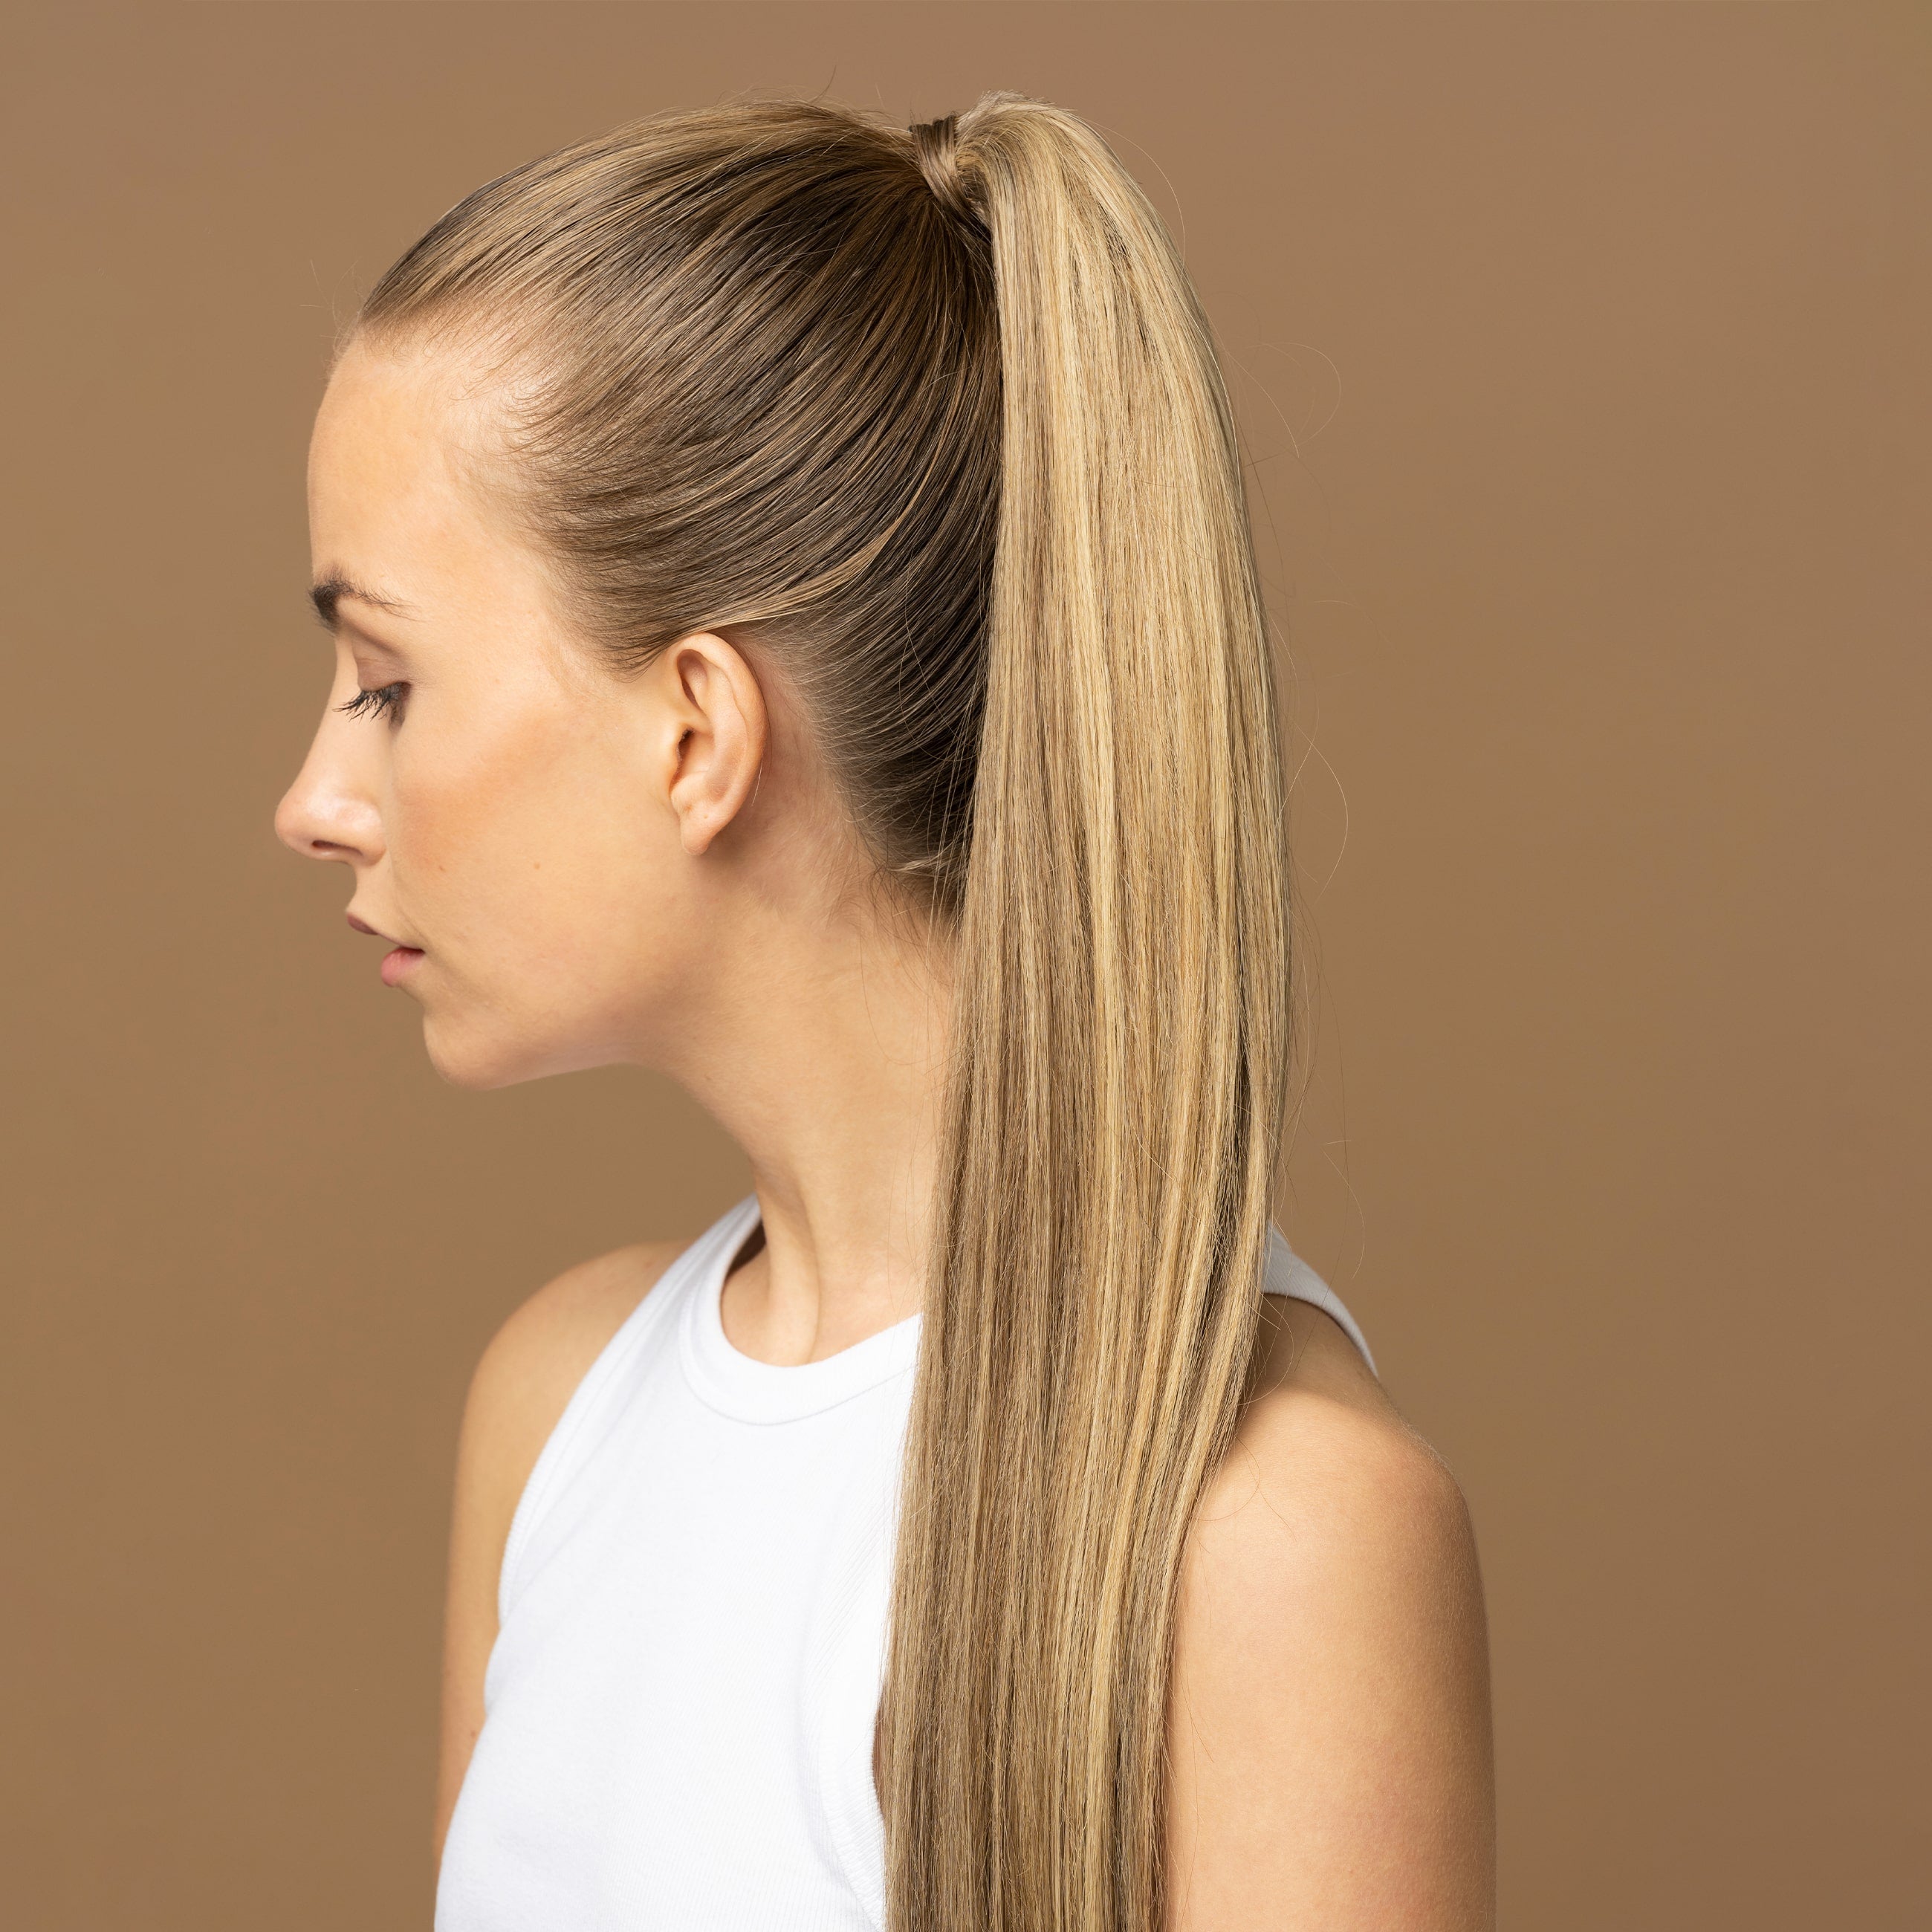 Ponytail Extensions - Helles Blond Nr. 60A